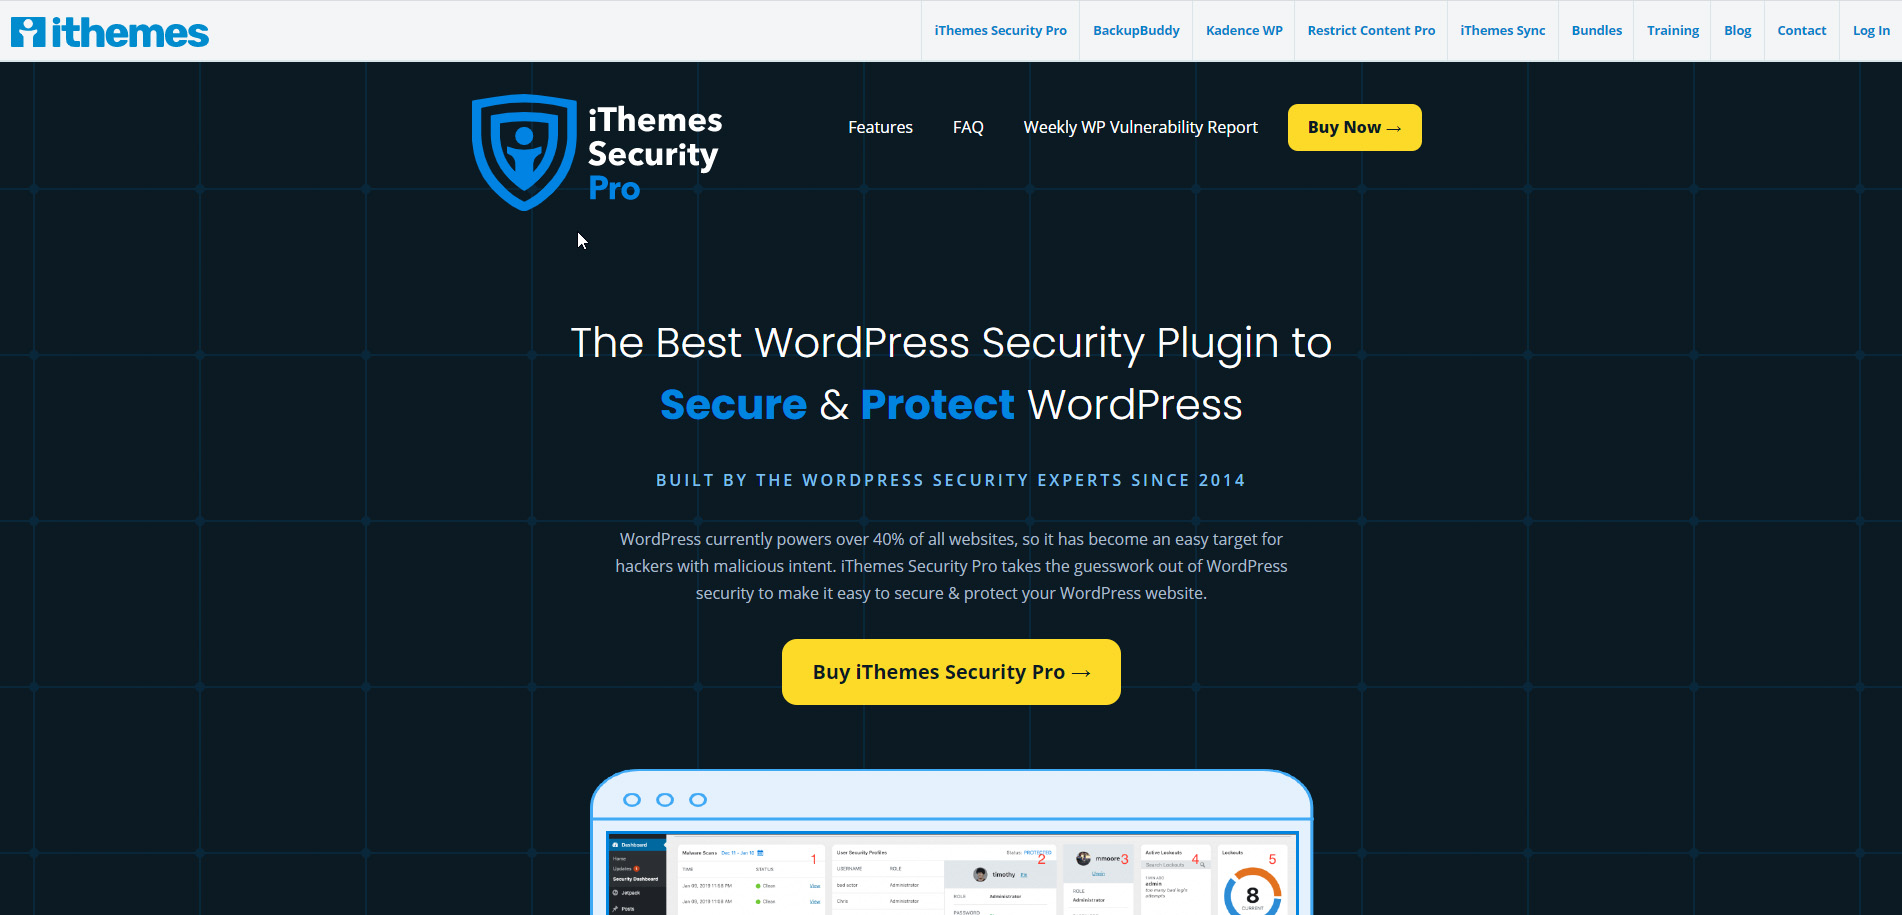 The iThemes Security Pro